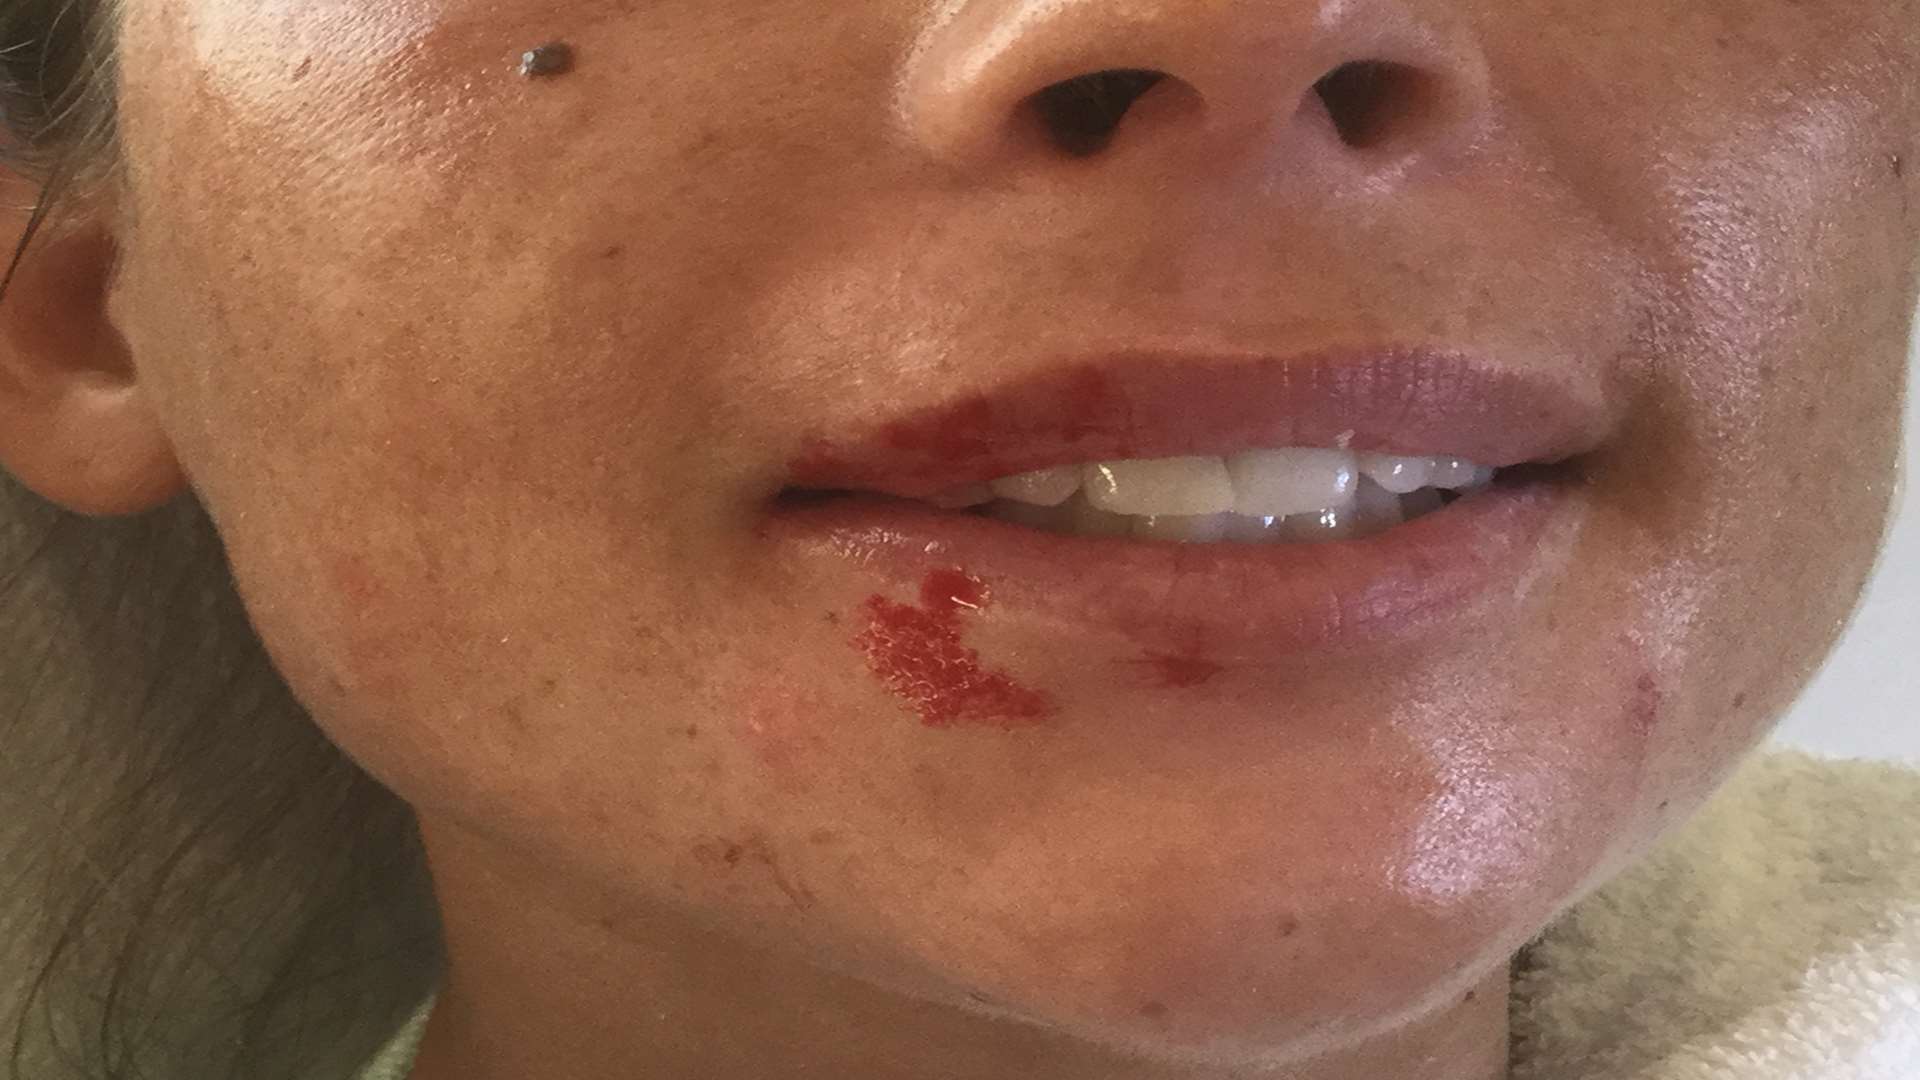 Blood around the mouth of the woman who left mid-treatment without paying